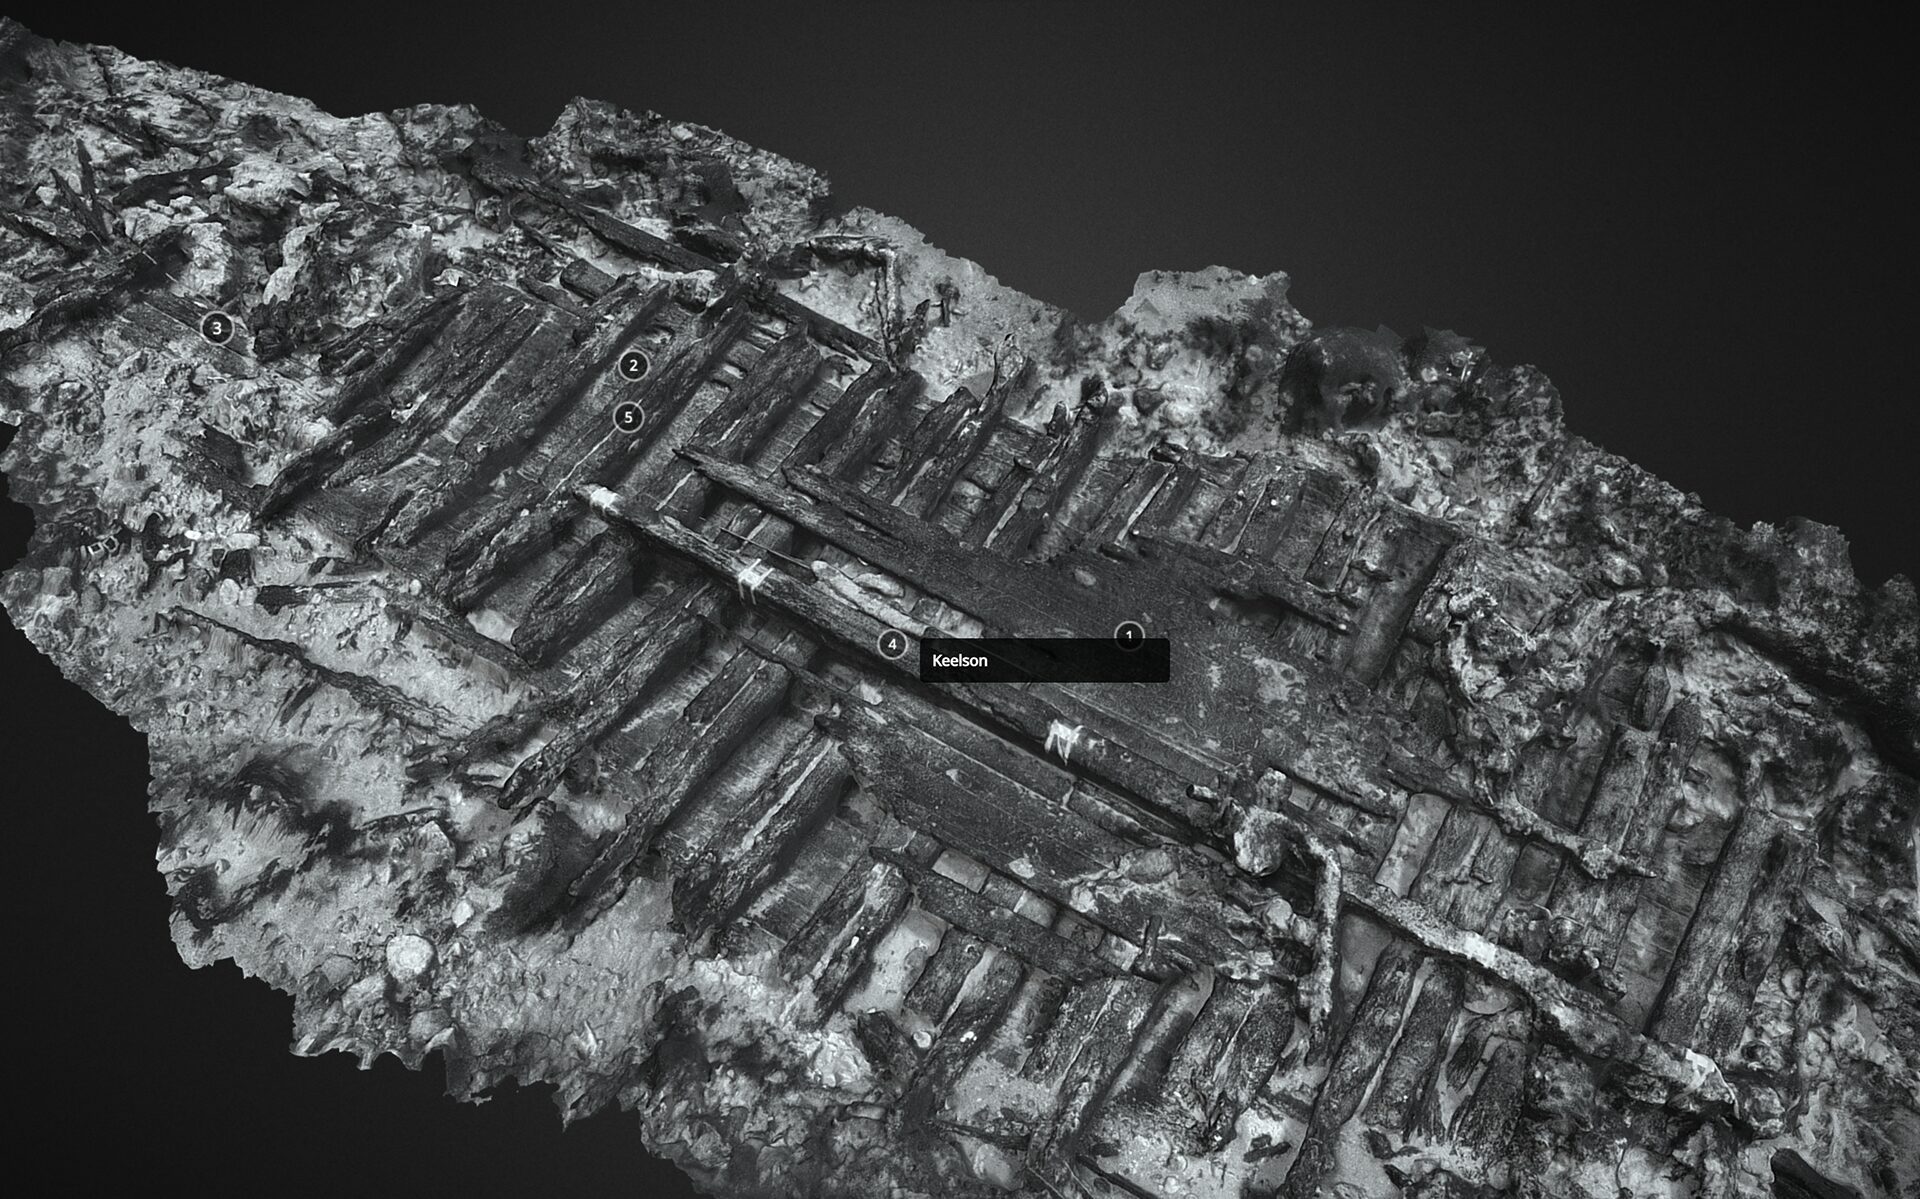 Image for Digital 3D model of WA shipwreck shared to mark anniversary of its loss